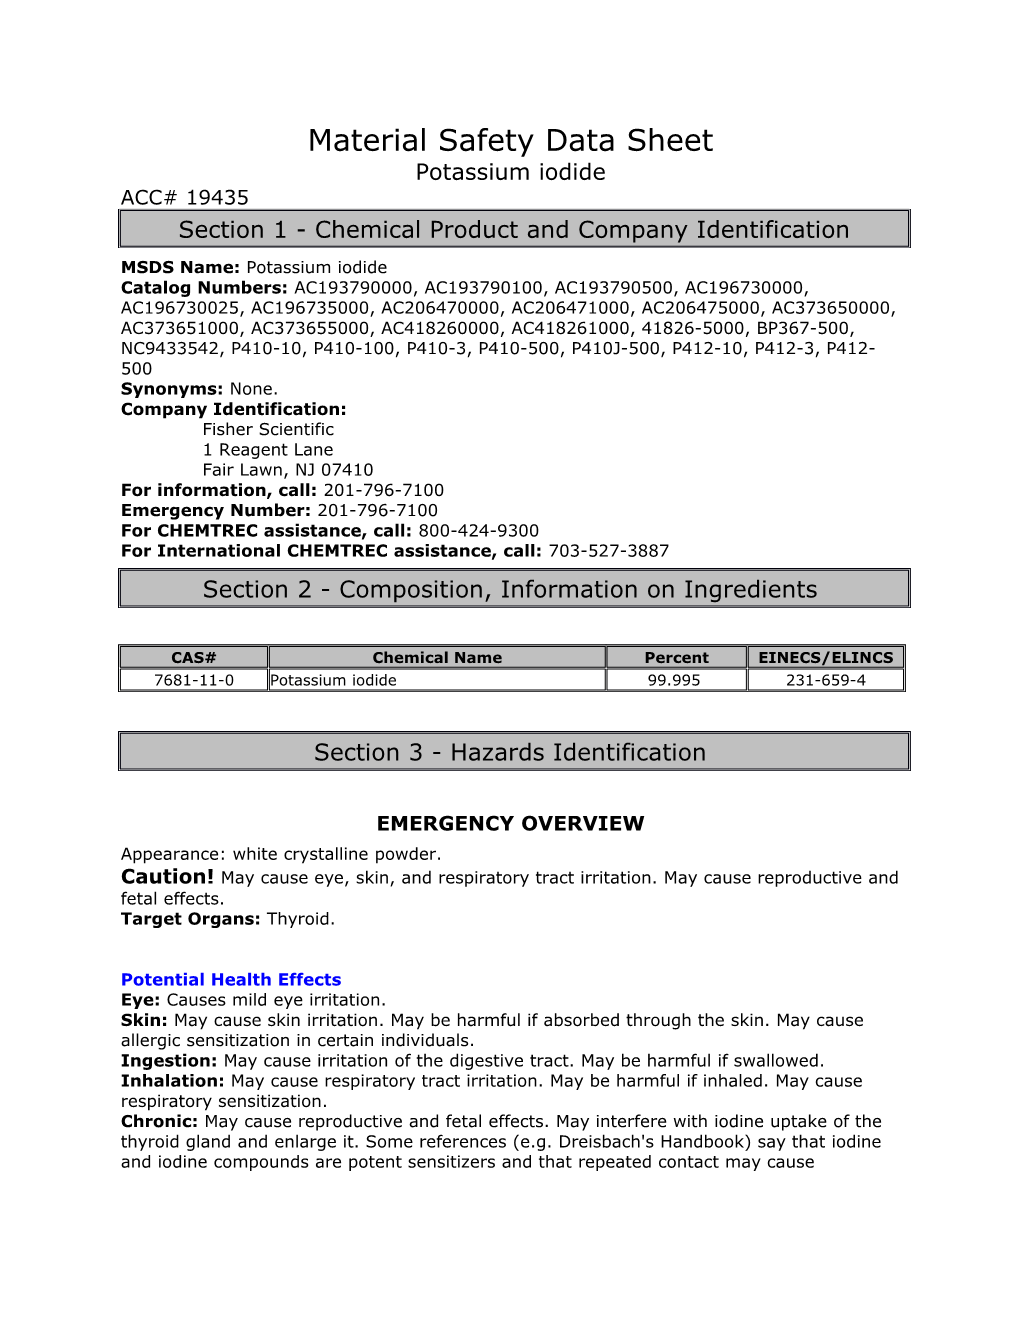 Material Safety Data Sheet s81